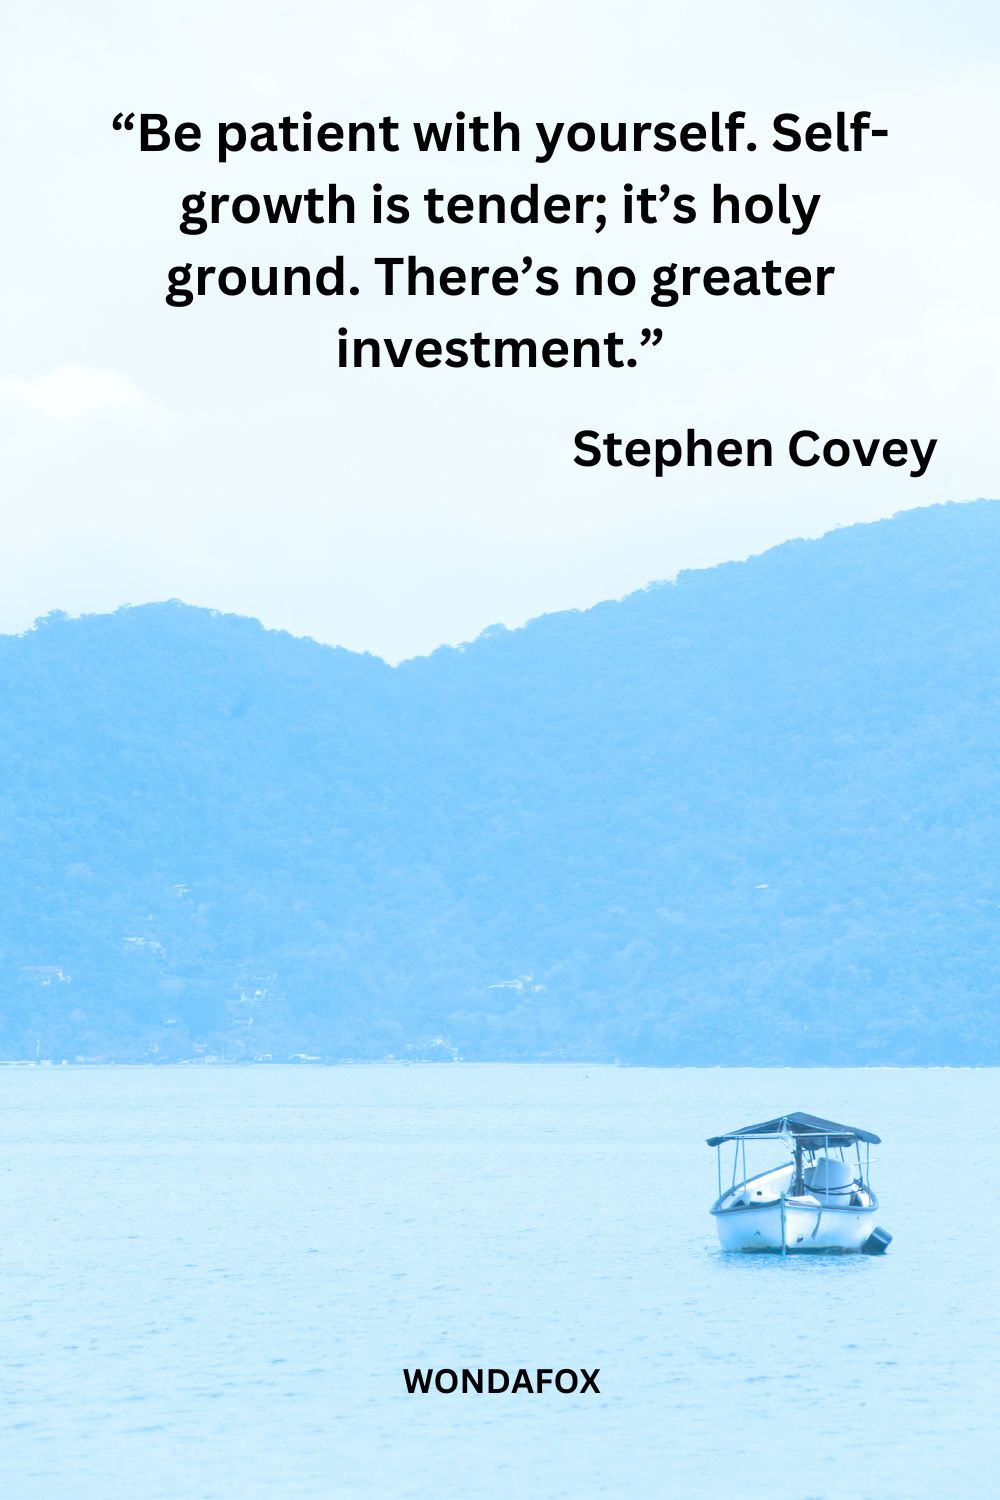 “Be patient with yourself. Self-growth is tender; it’s holy ground. There’s no greater investment.”
Stephen Covey